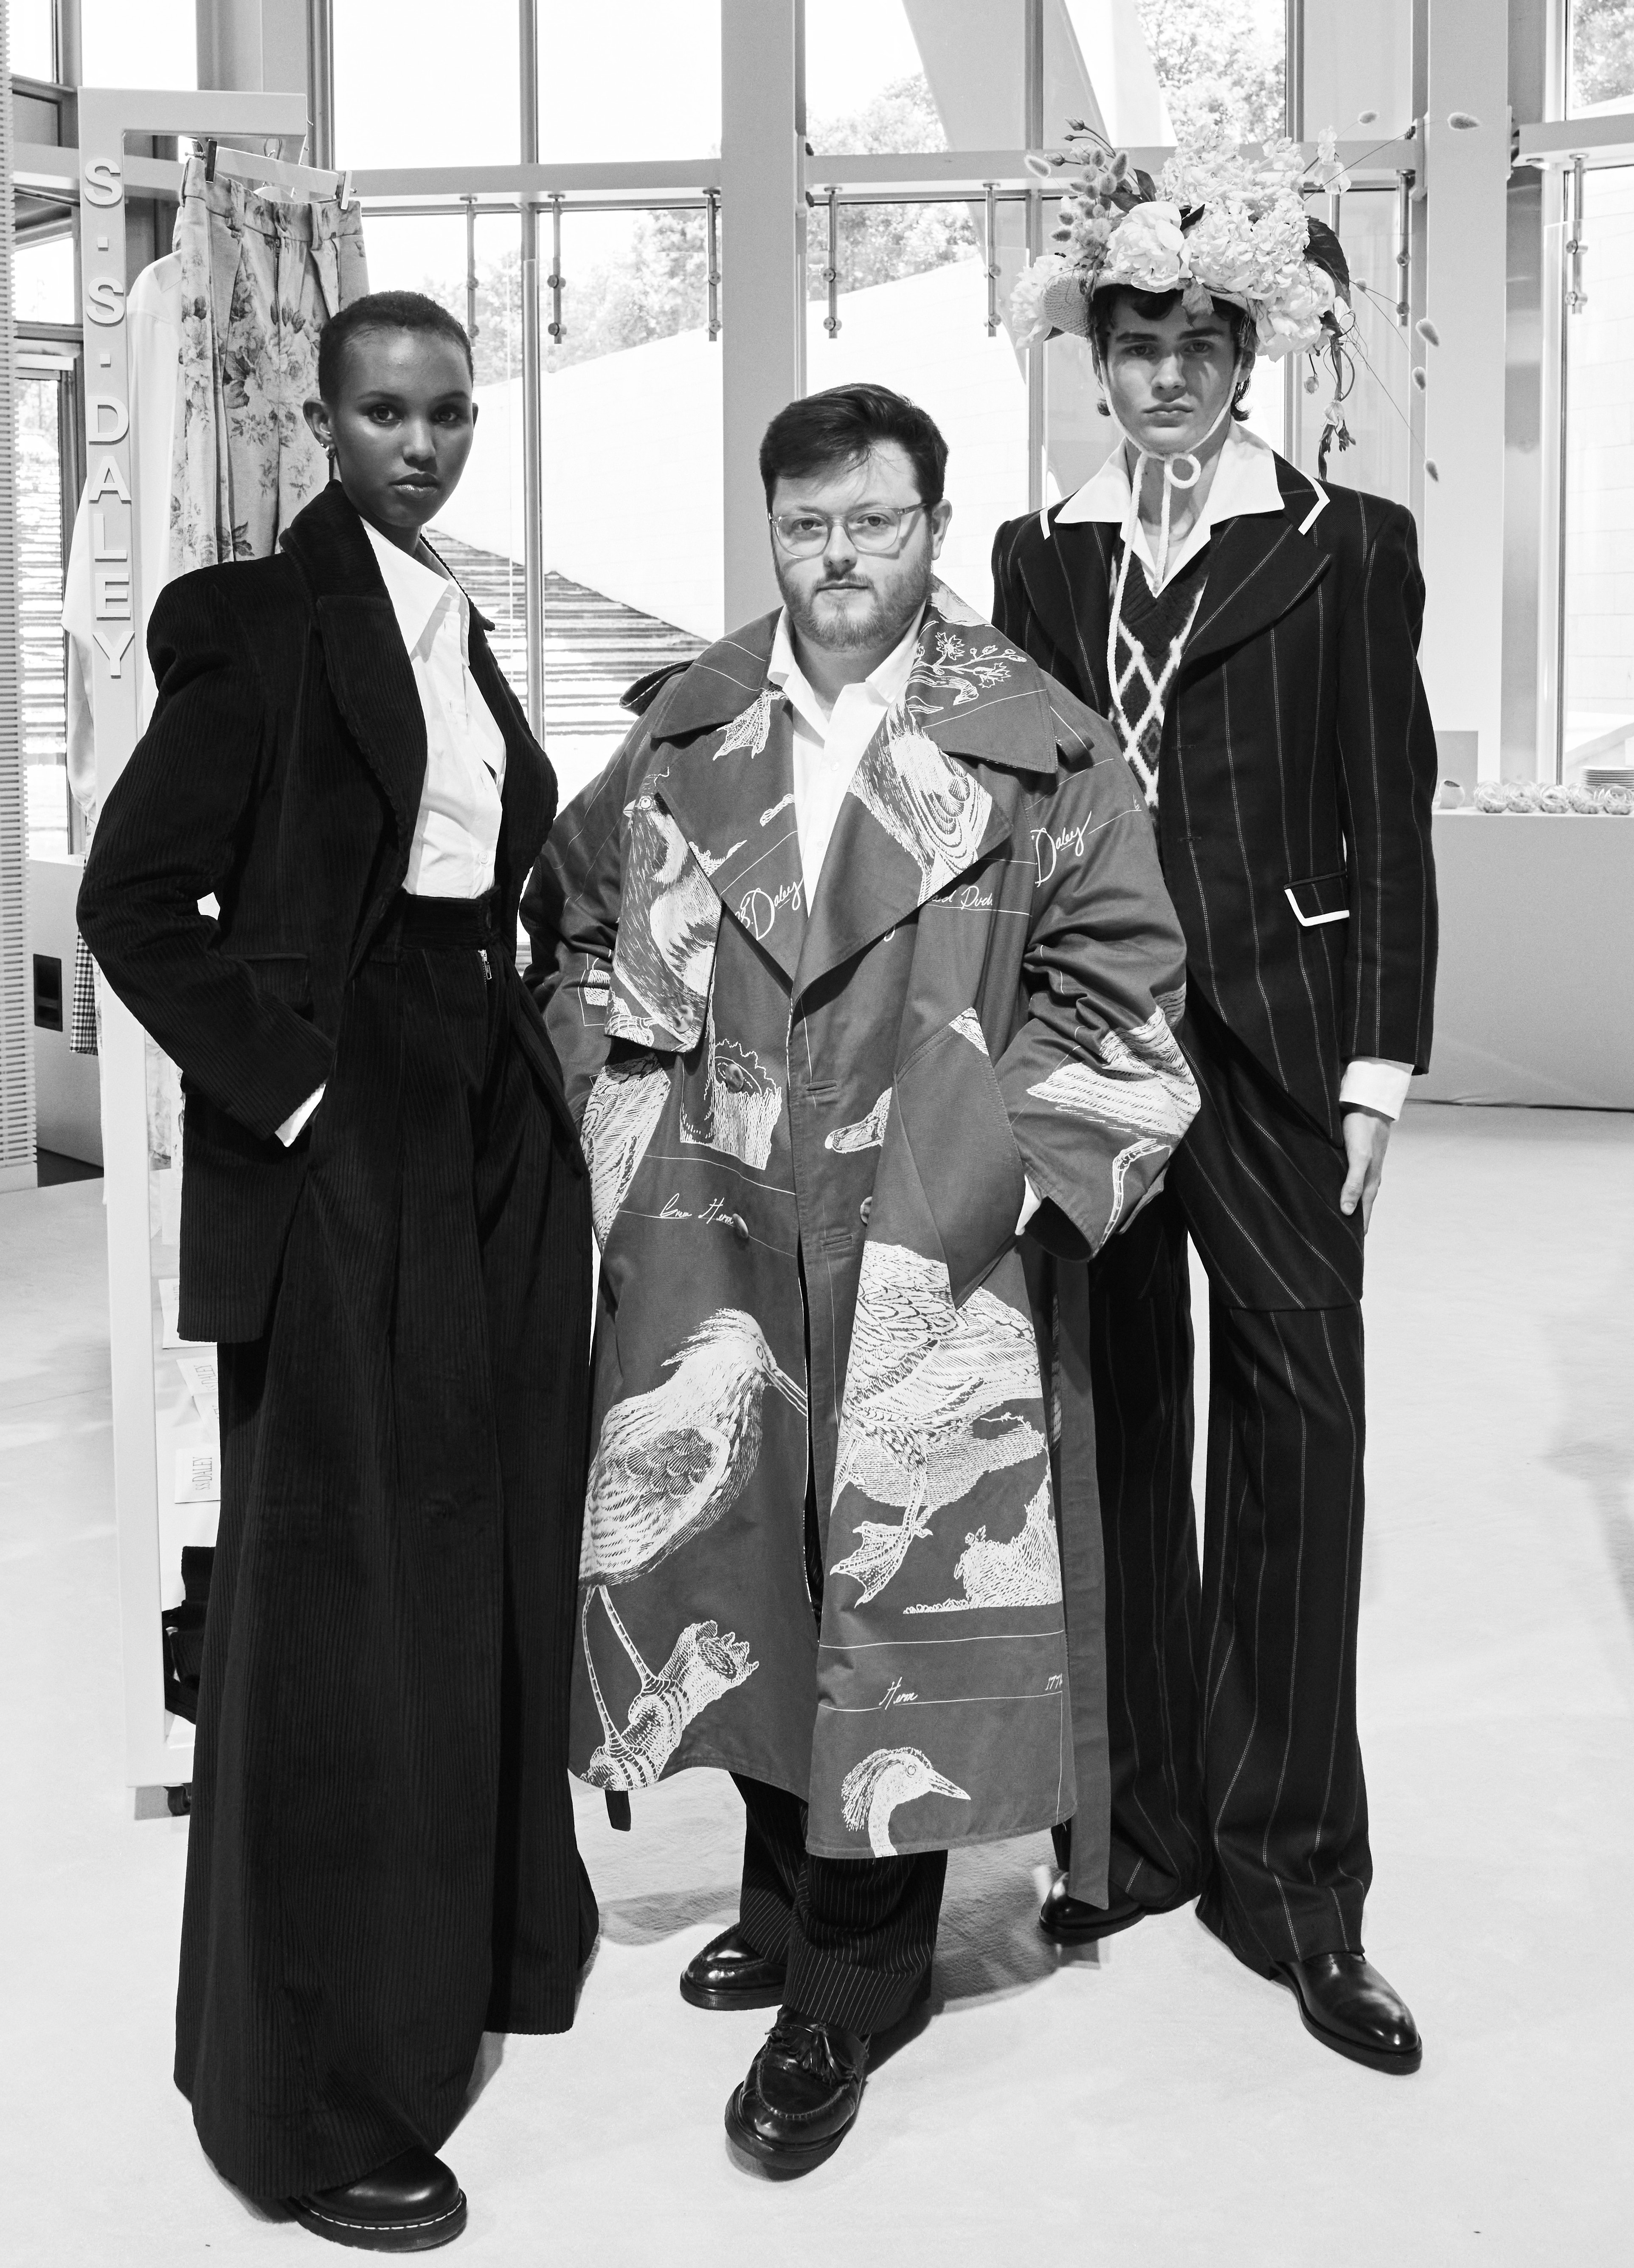 Steven Stokey Daley wins the 2022 LVMH Award for Young Fashion Designers